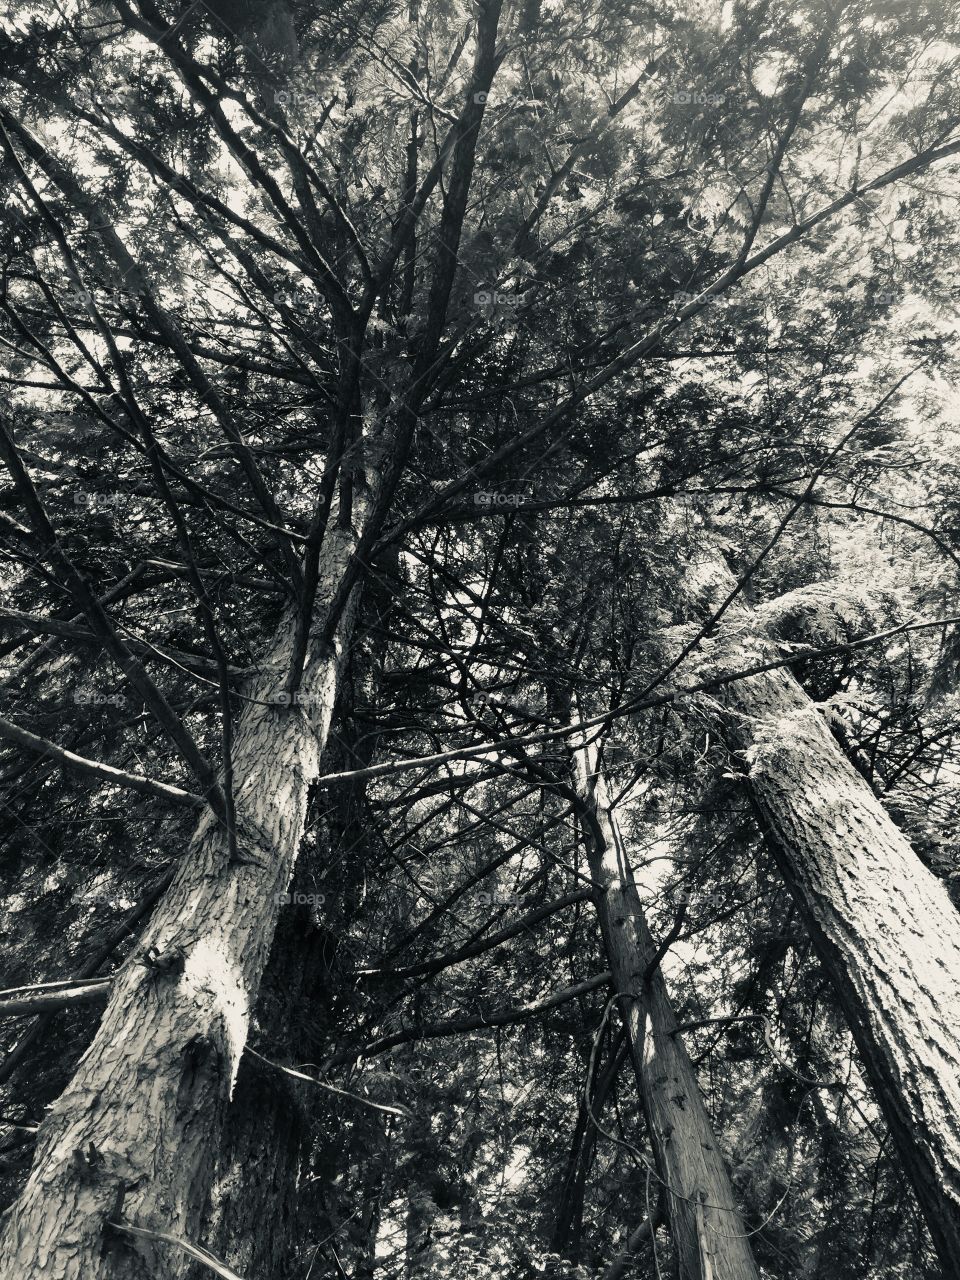 Large trees tower over me as I choose to look at them from a different perspective at Pacific Spirit Forest in Vancouver, British Columbia 